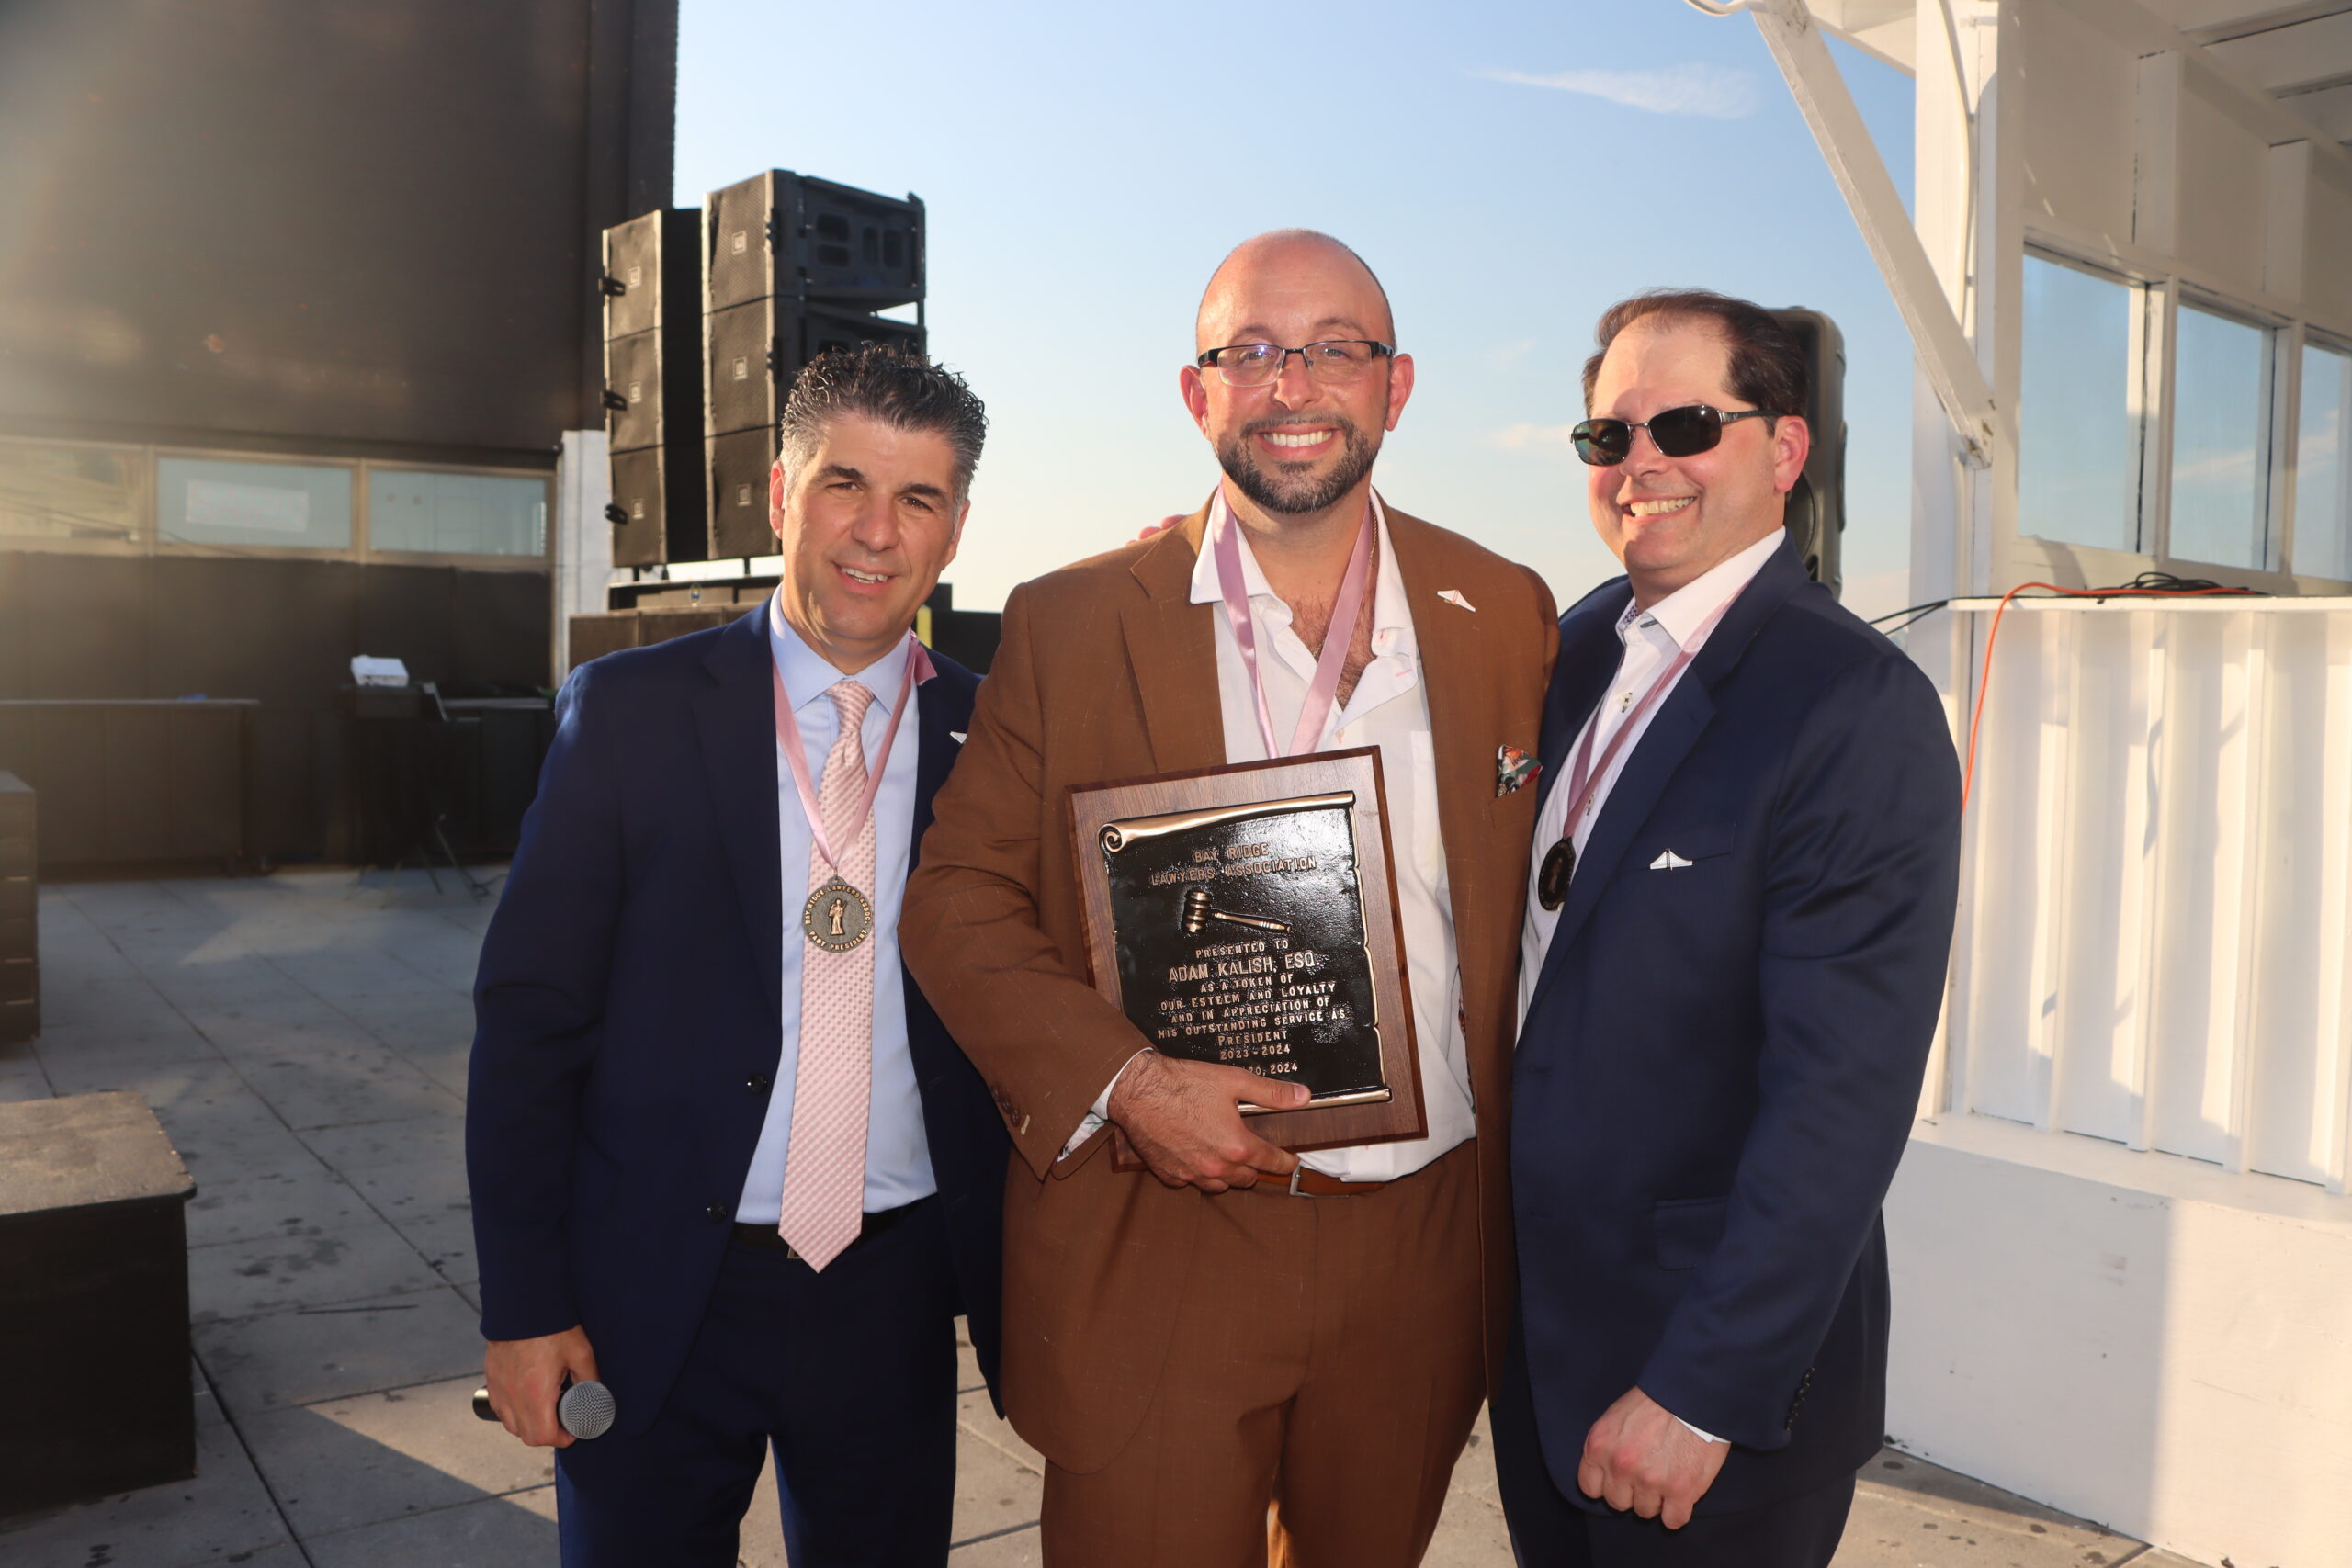 Dominic Famulari (left) and Steven Chiaino (right) present outgoing BRLA President Adam Kalish with a plaque in recognition of his outstanding service. Eagle photos by Mario Belluomo